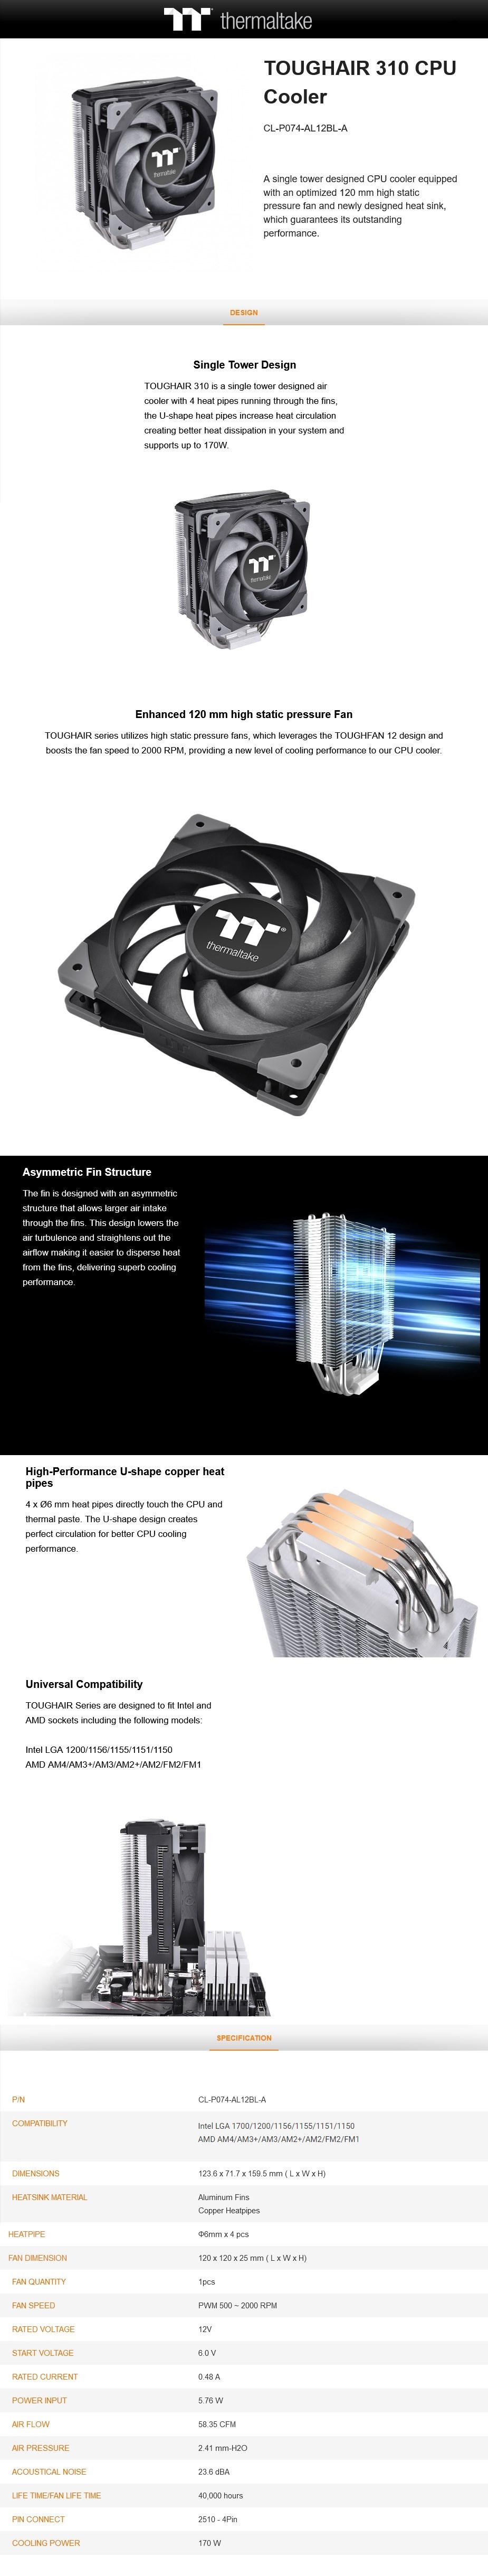 A large marketing image providing additional information about the product Thermaltake Toughair 310 - CPU Cooler - Additional alt info not provided